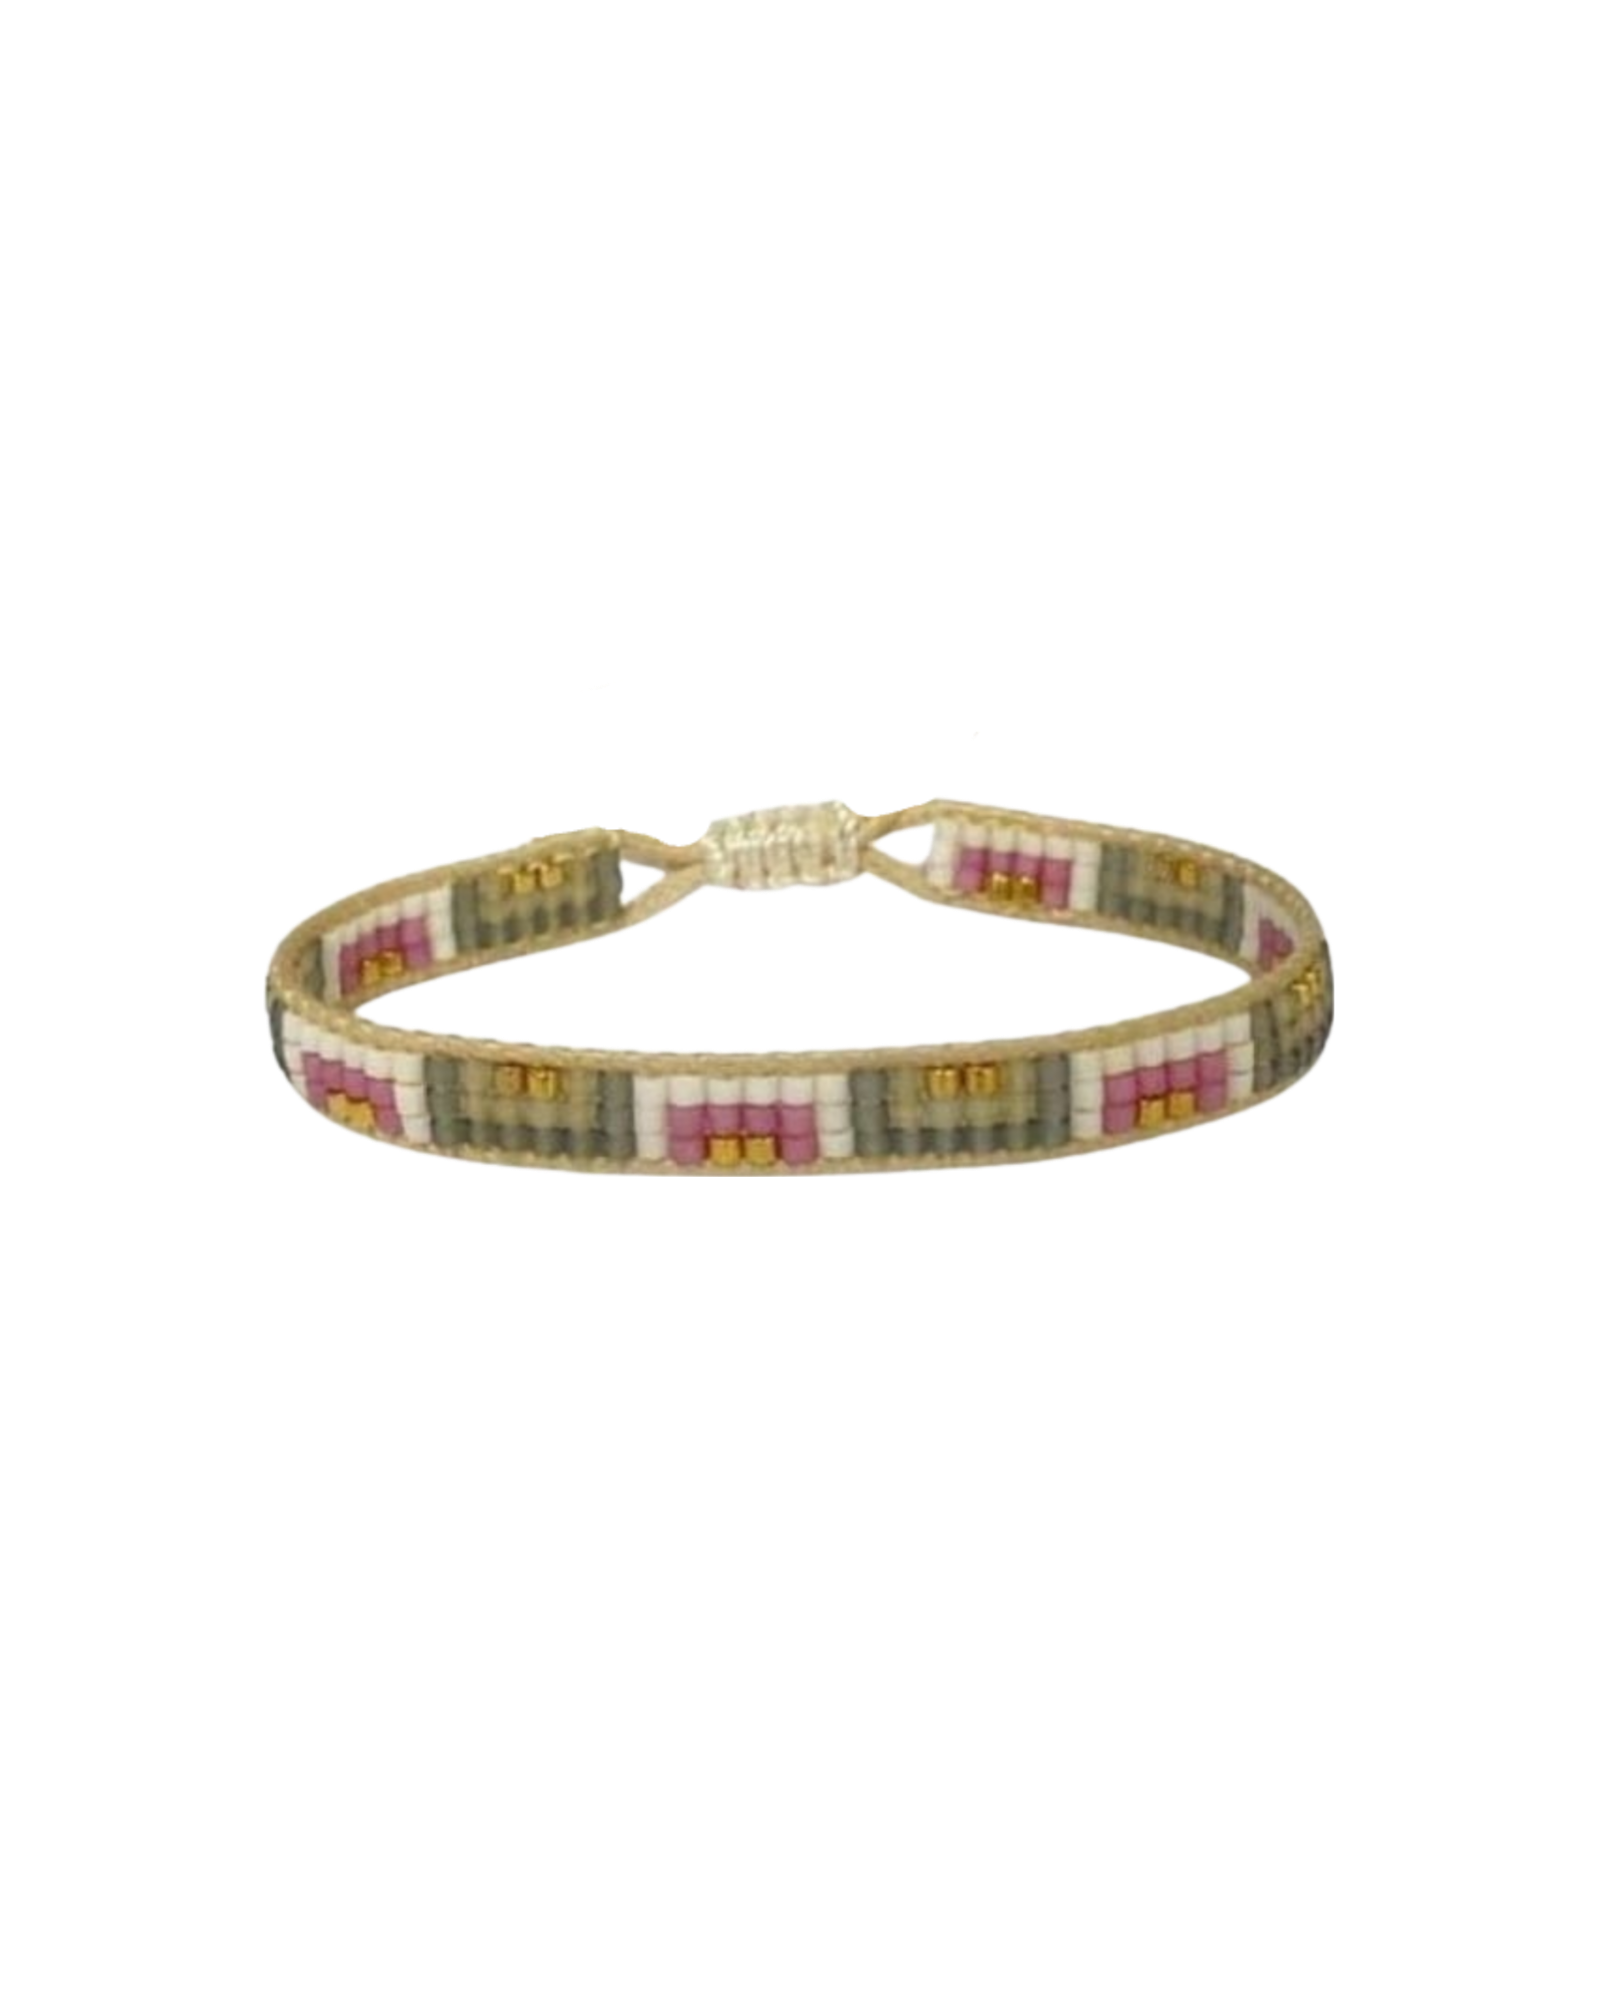 lilac beaded mexican bracelet with geometric design